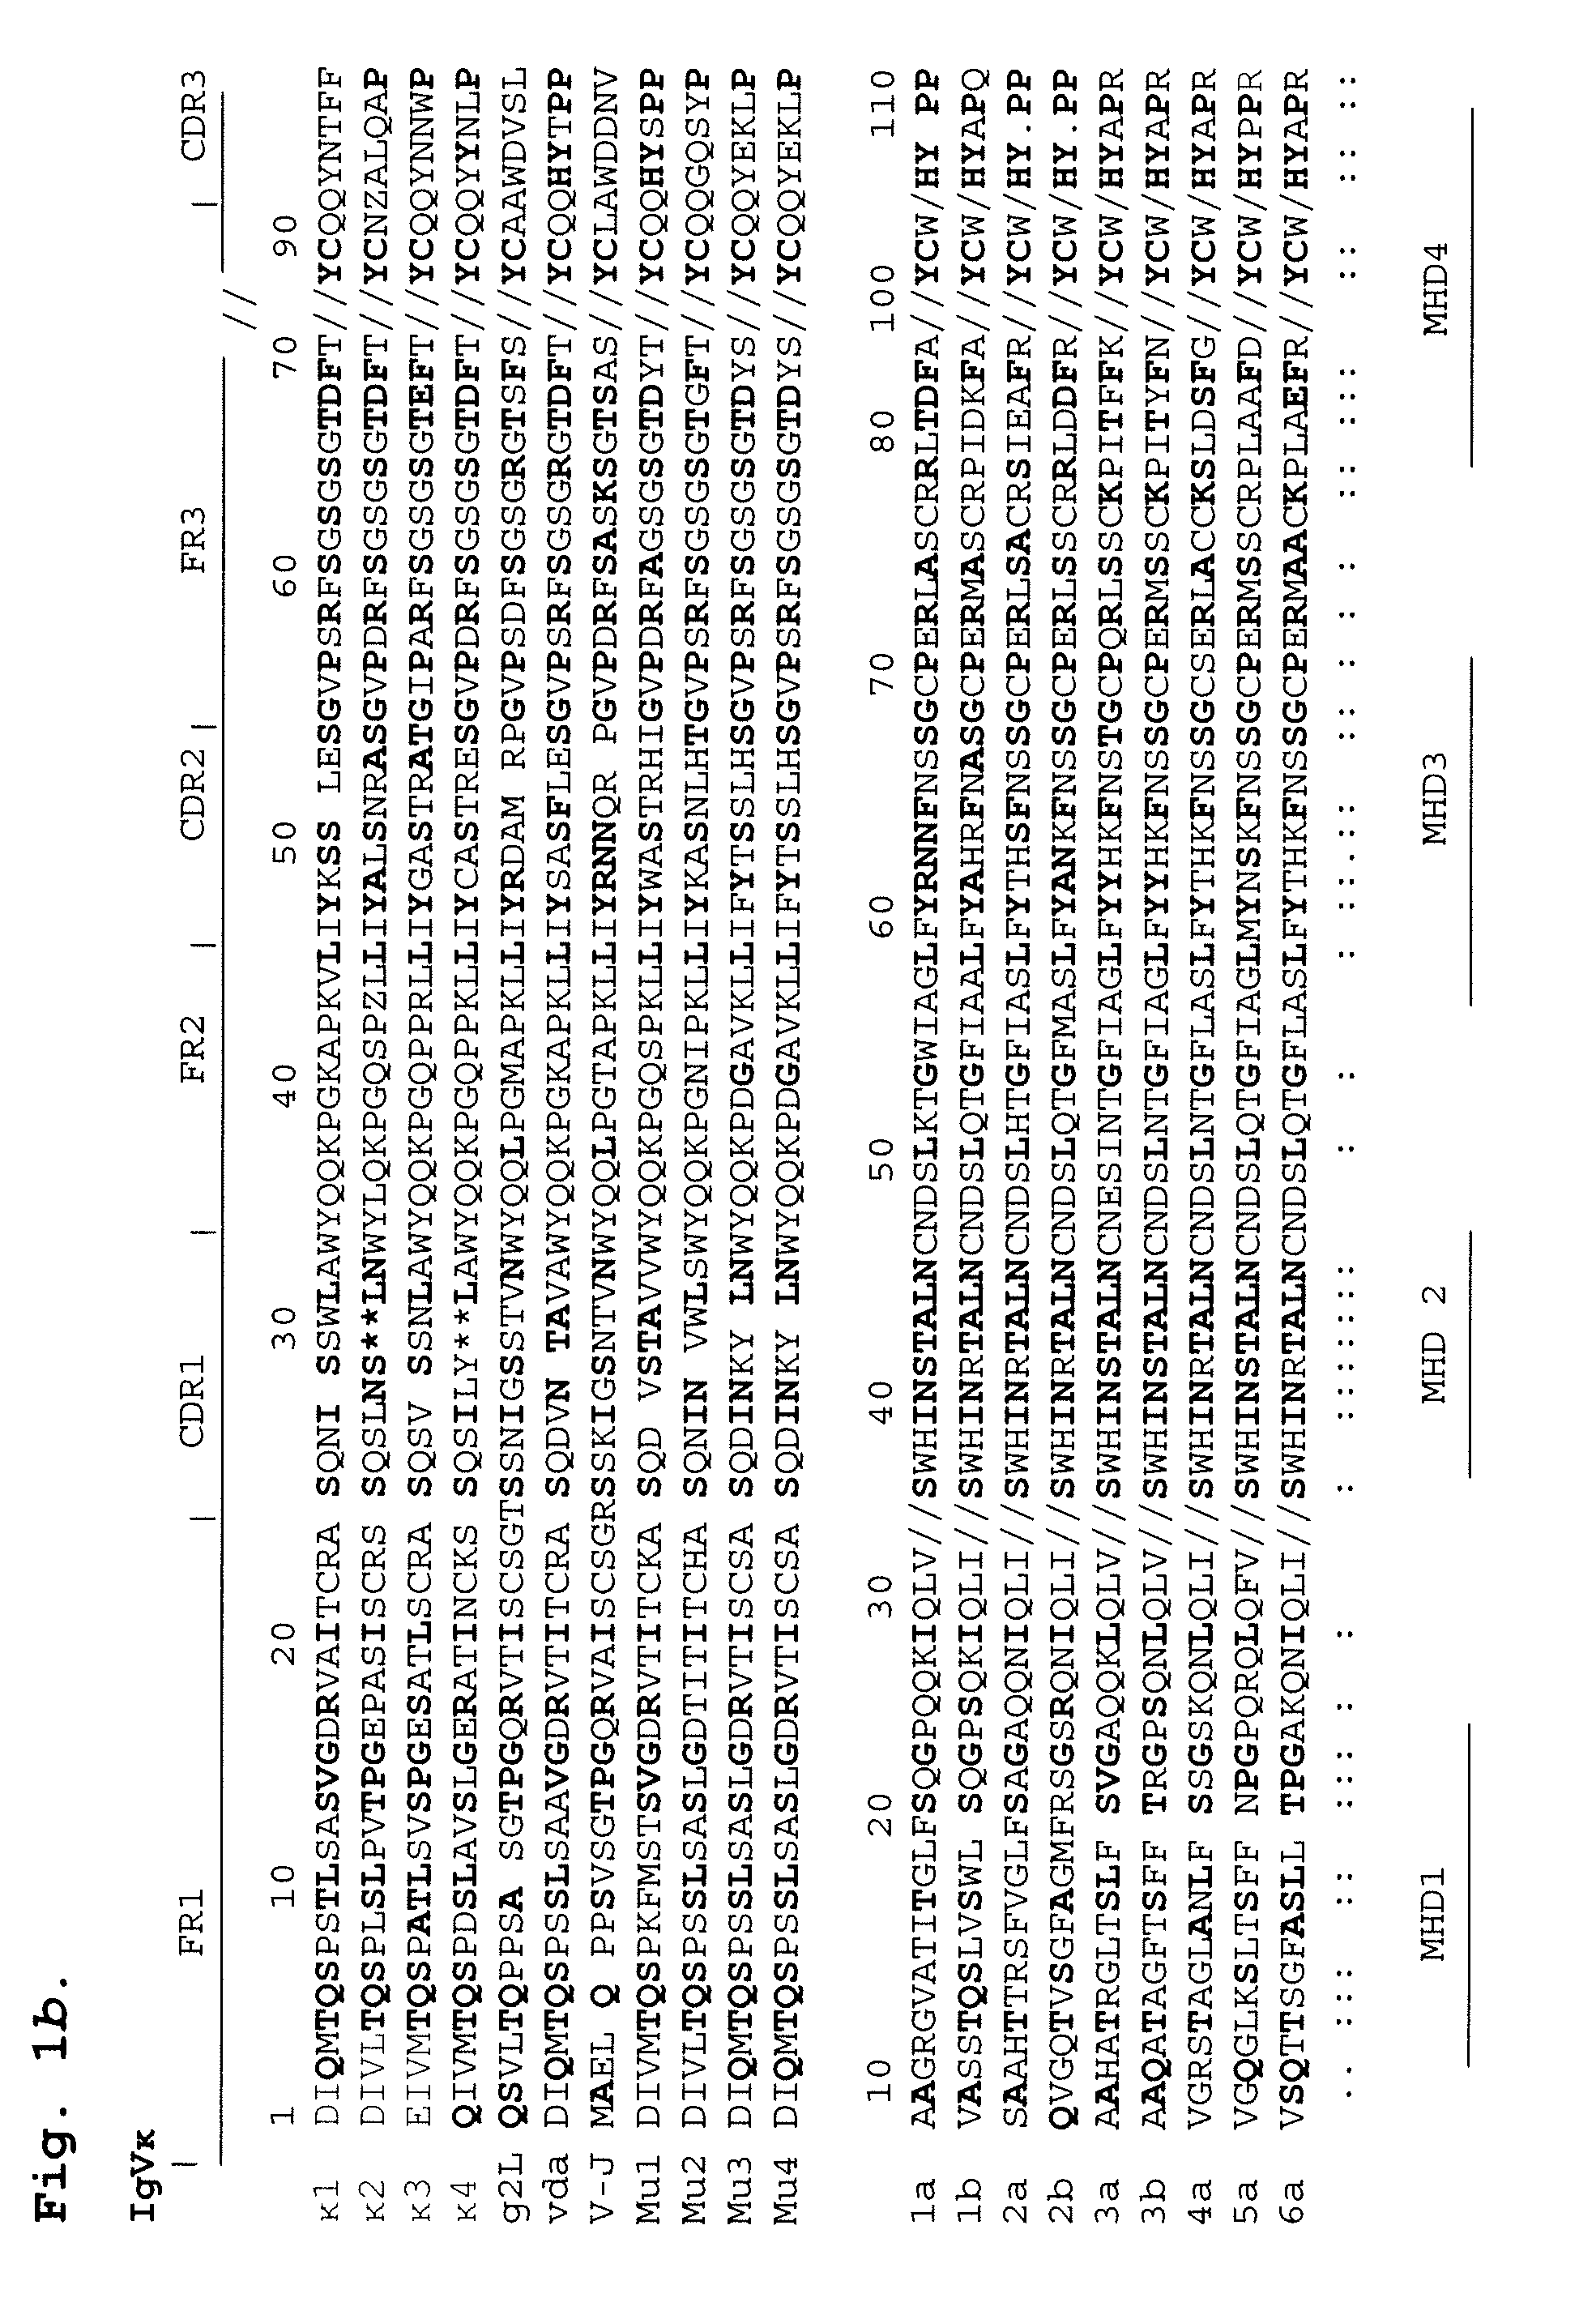 Detection, characterization and treatment of viral infection and methods thereof